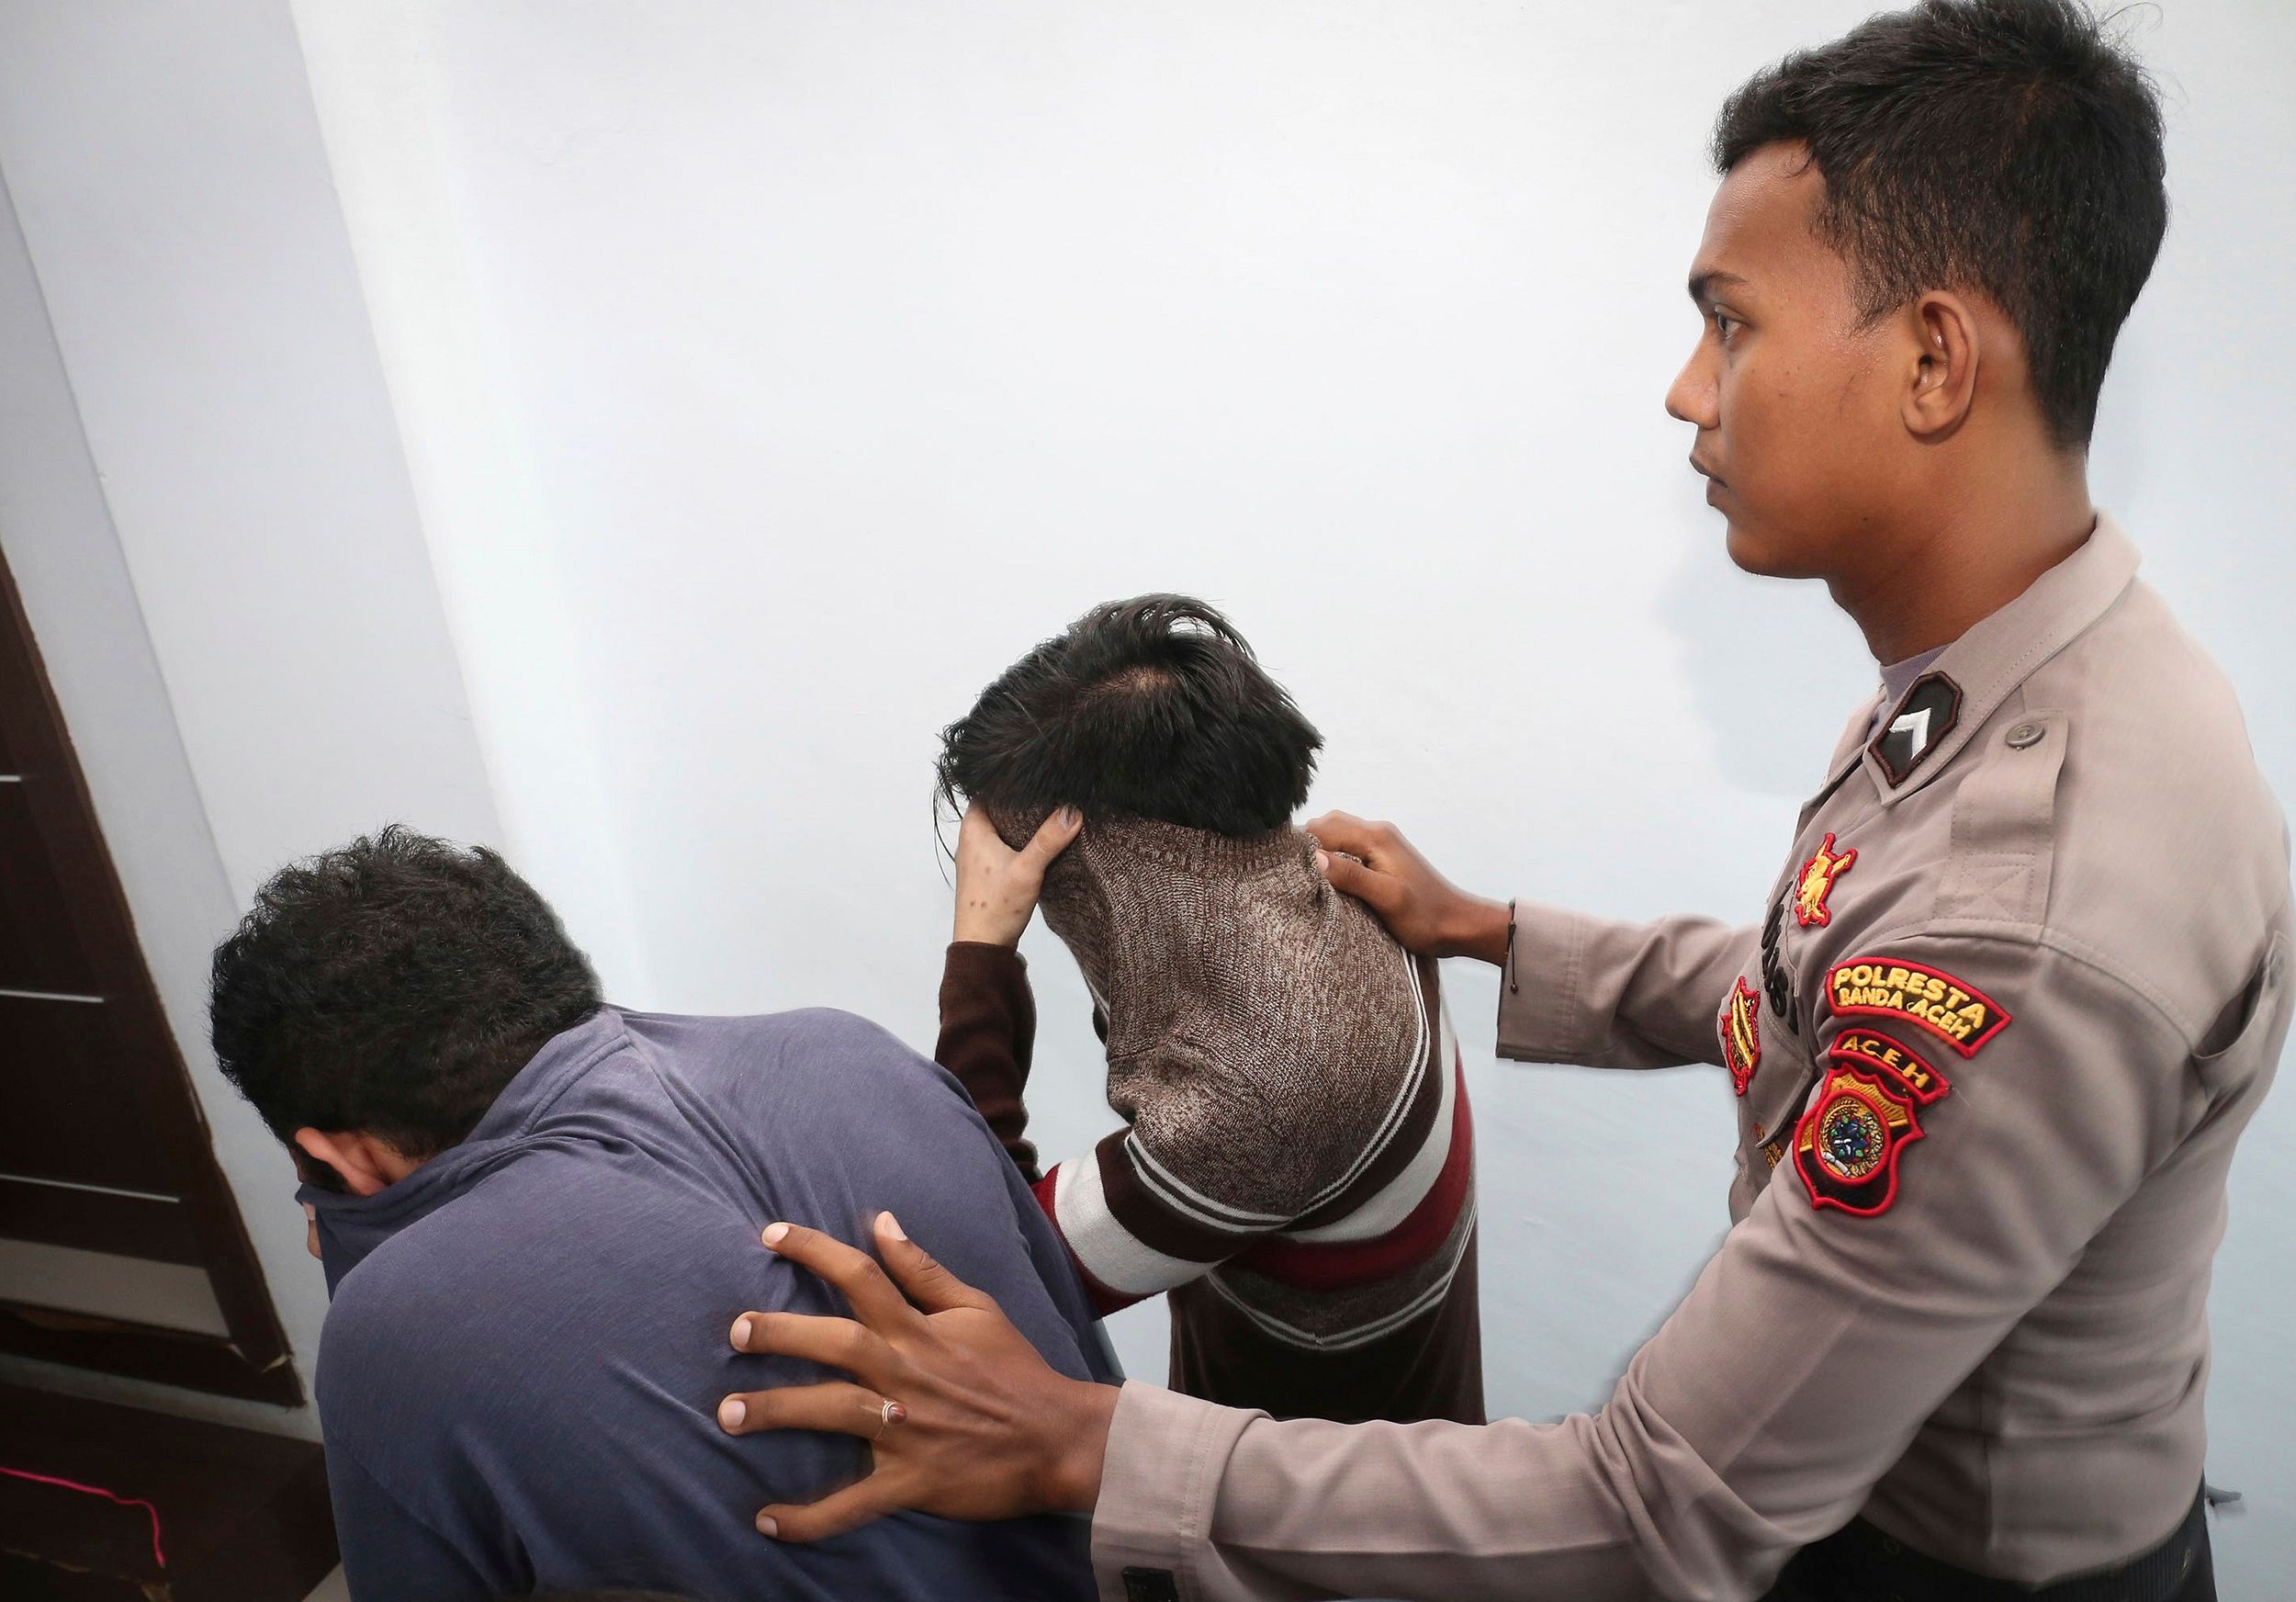 Police In Indonesia Detained 58 Men In Raid On Gay Sauna - I24NEWS